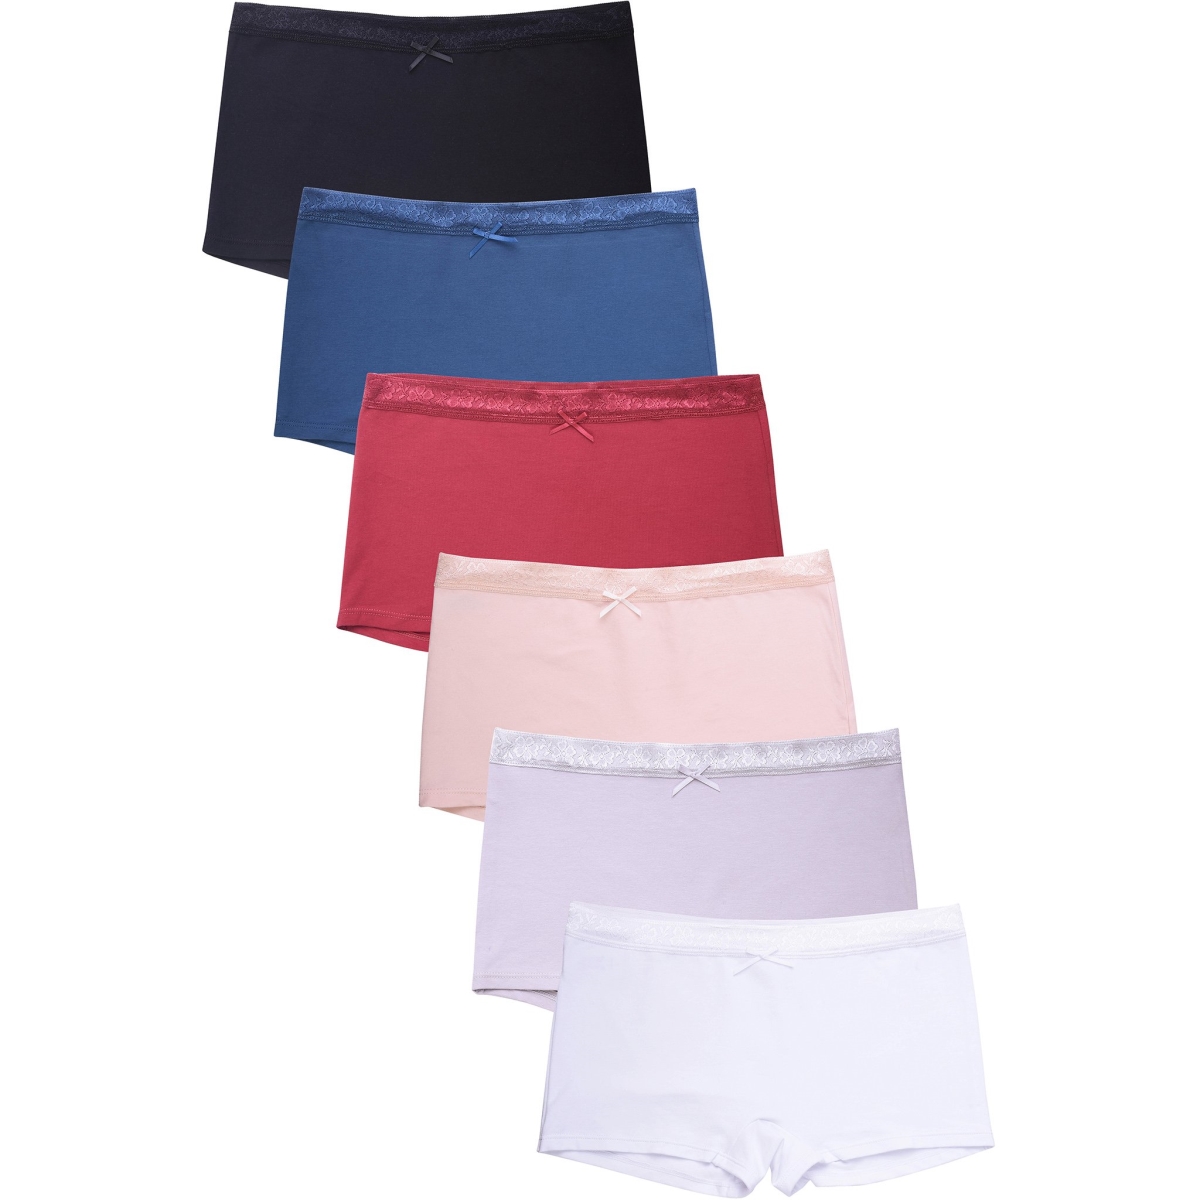 Picture of 247 Frenzy 247-LP1384CB3-SM Sofra Womens Essentials Cotton Stretch Boyshort Panty Underwear - Assorted Color - Small - Pack of 6